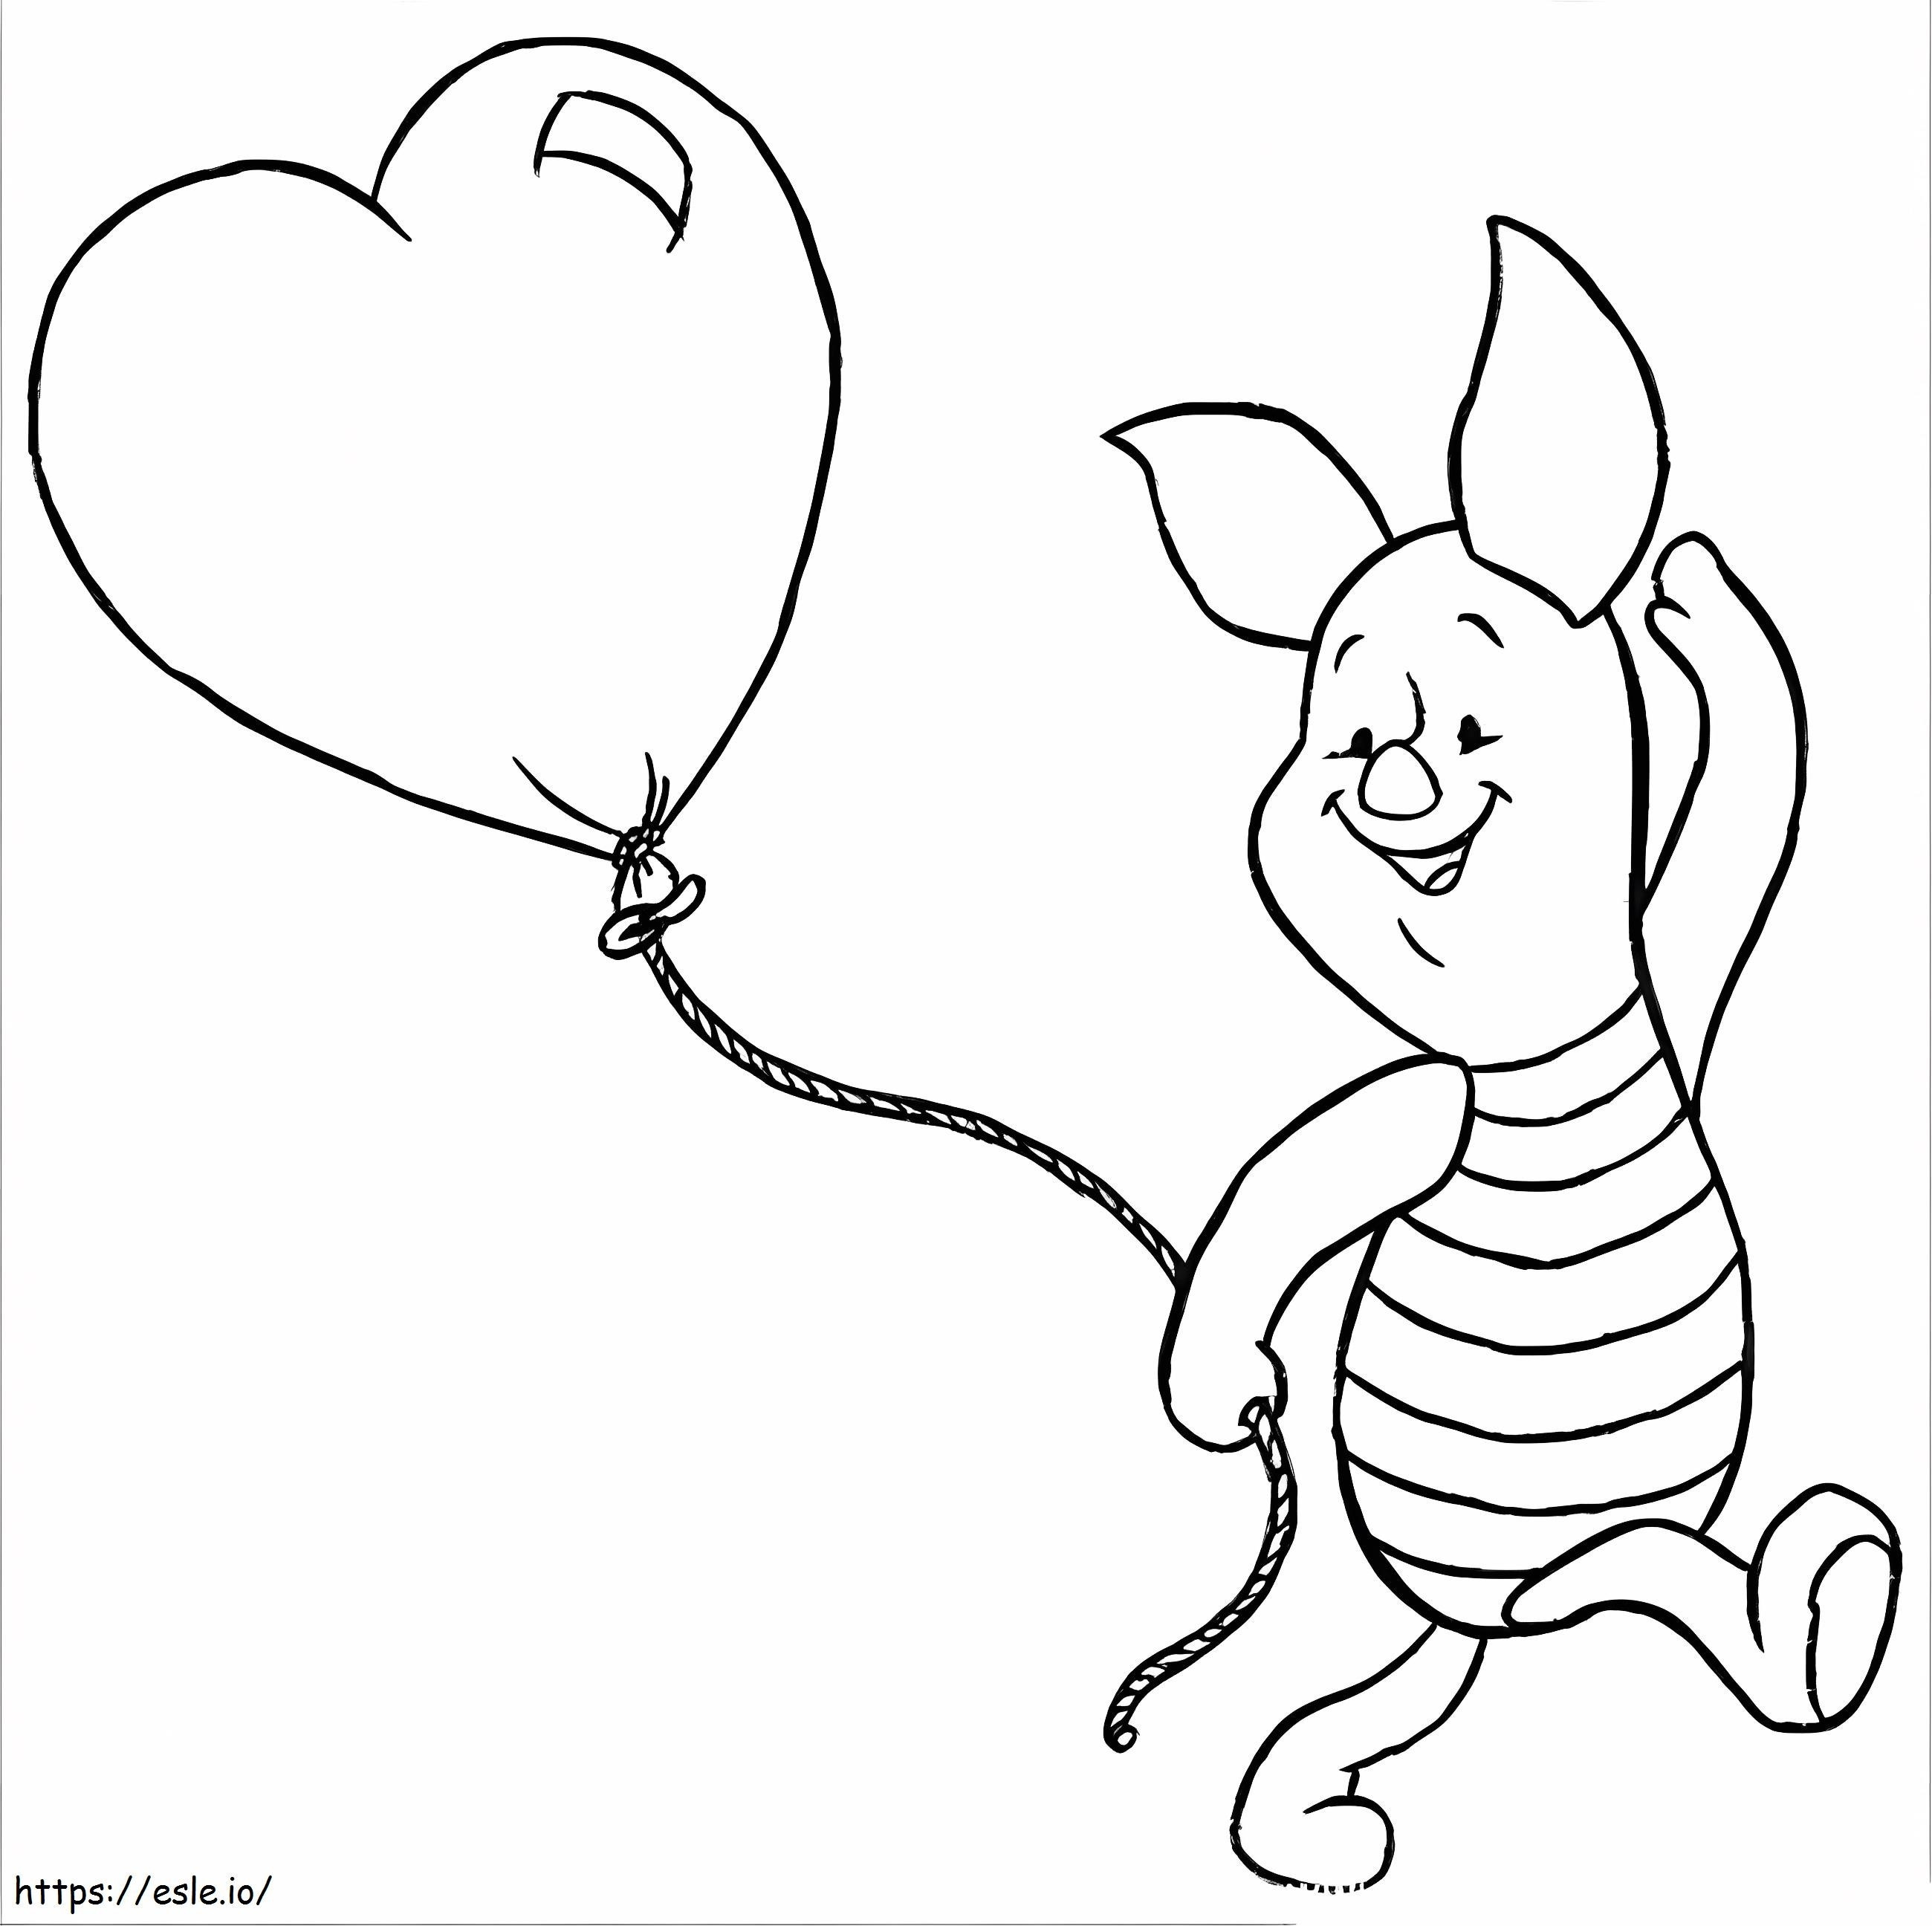 Piglet Holding Balloon coloring page